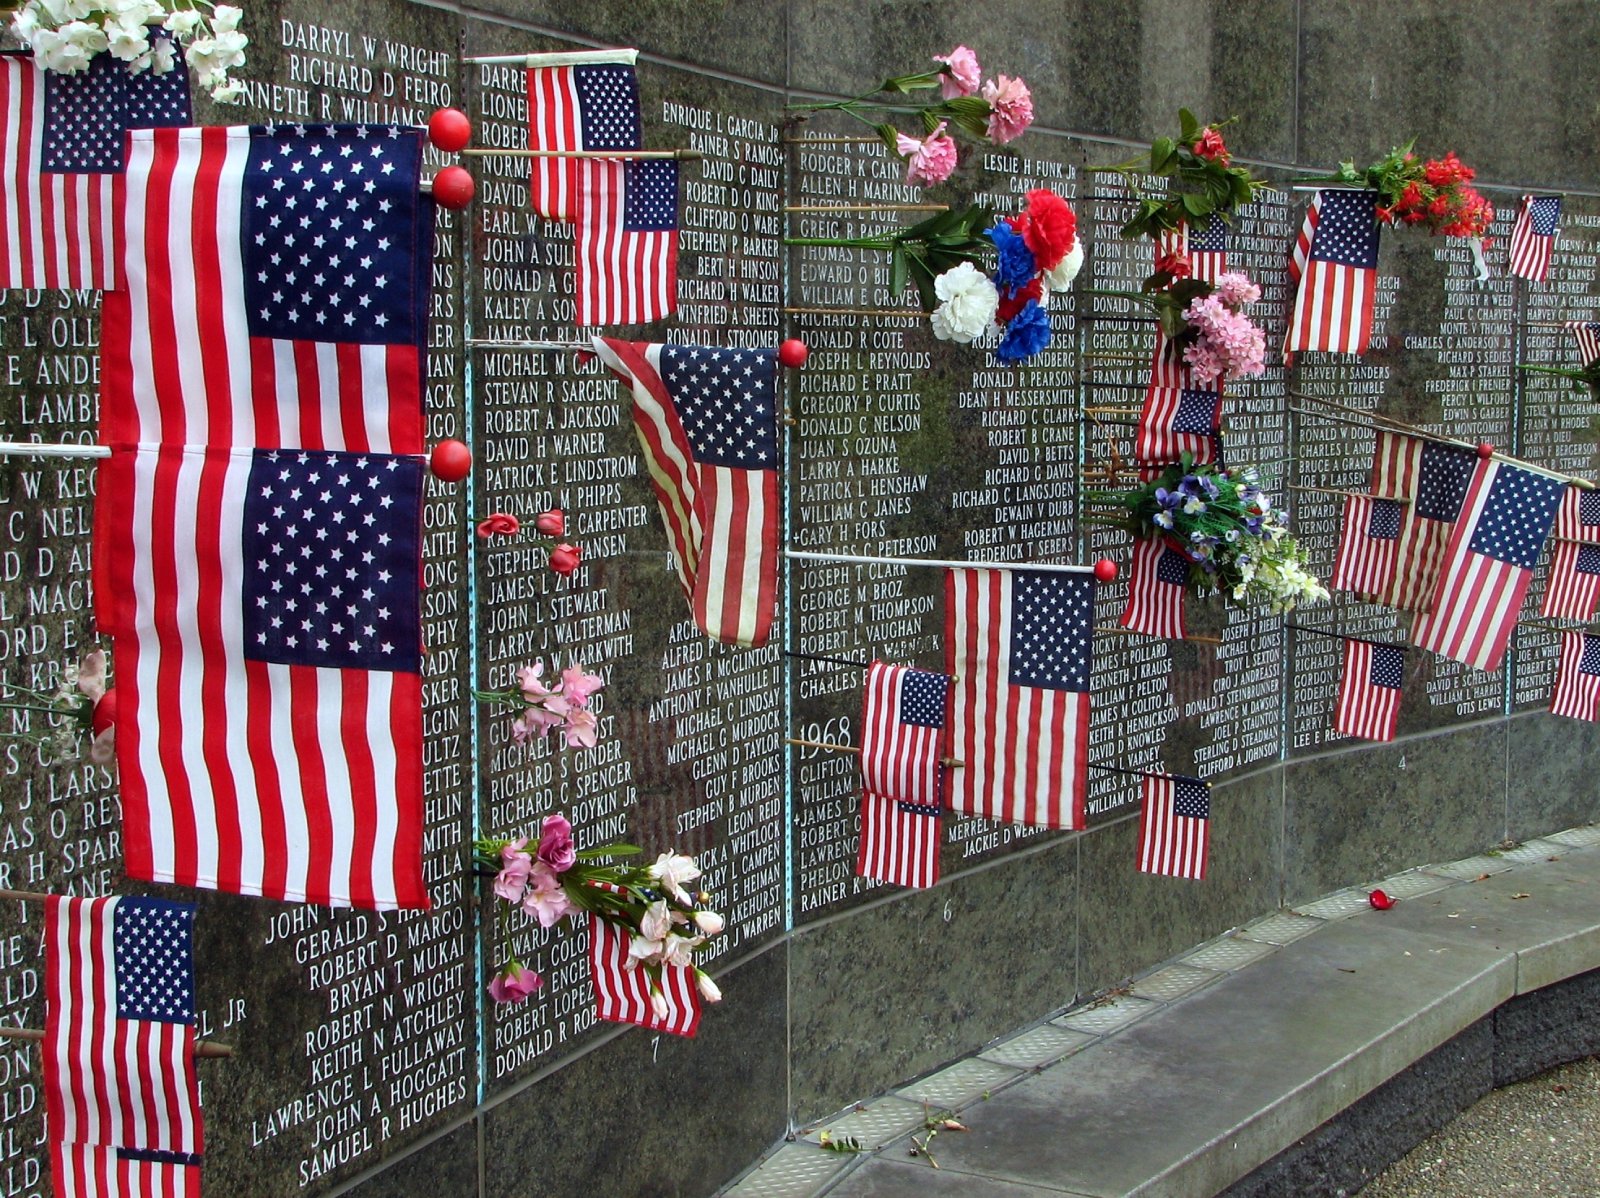 <p class="wp-caption-text">Image Credit: Shutterstock / Paula Cobleigh</p>  <p>The stark, reflective wall inscribed with the names of over 58,000 Americans who died in or were missing in action from Vietnam is a profound testament to the war’s impact.</p>